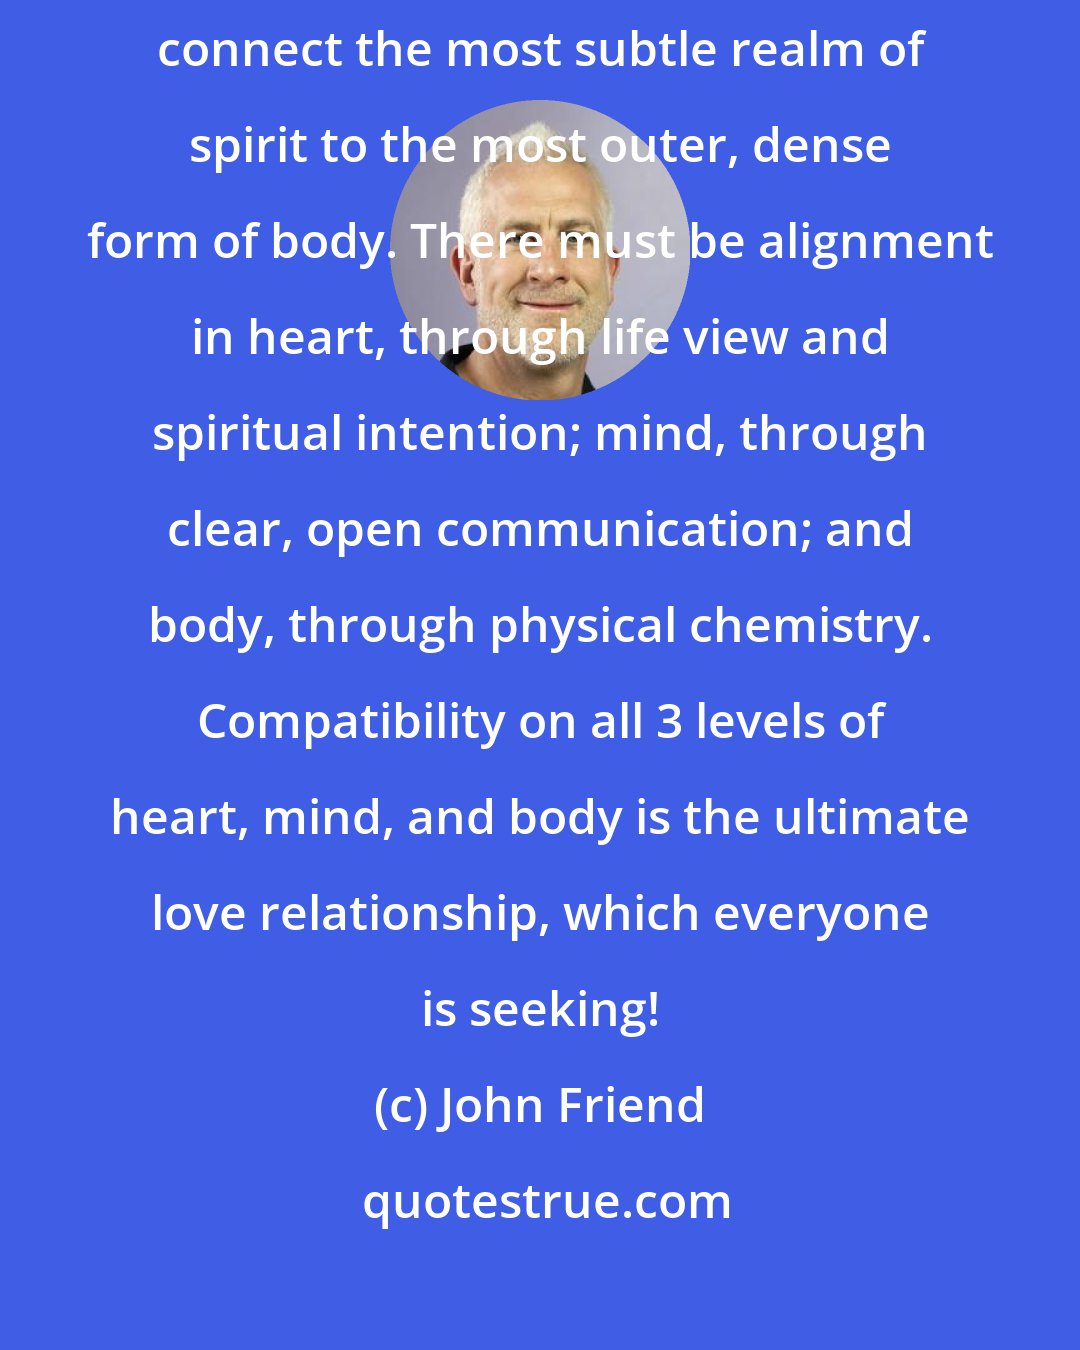 John Friend: There are 3 levels of compatibility in intimate relationships that connect the most subtle realm of spirit to the most outer, dense form of body. There must be alignment in heart, through life view and spiritual intention; mind, through clear, open communication; and body, through physical chemistry. Compatibility on all 3 levels of heart, mind, and body is the ultimate love relationship, which everyone is seeking!